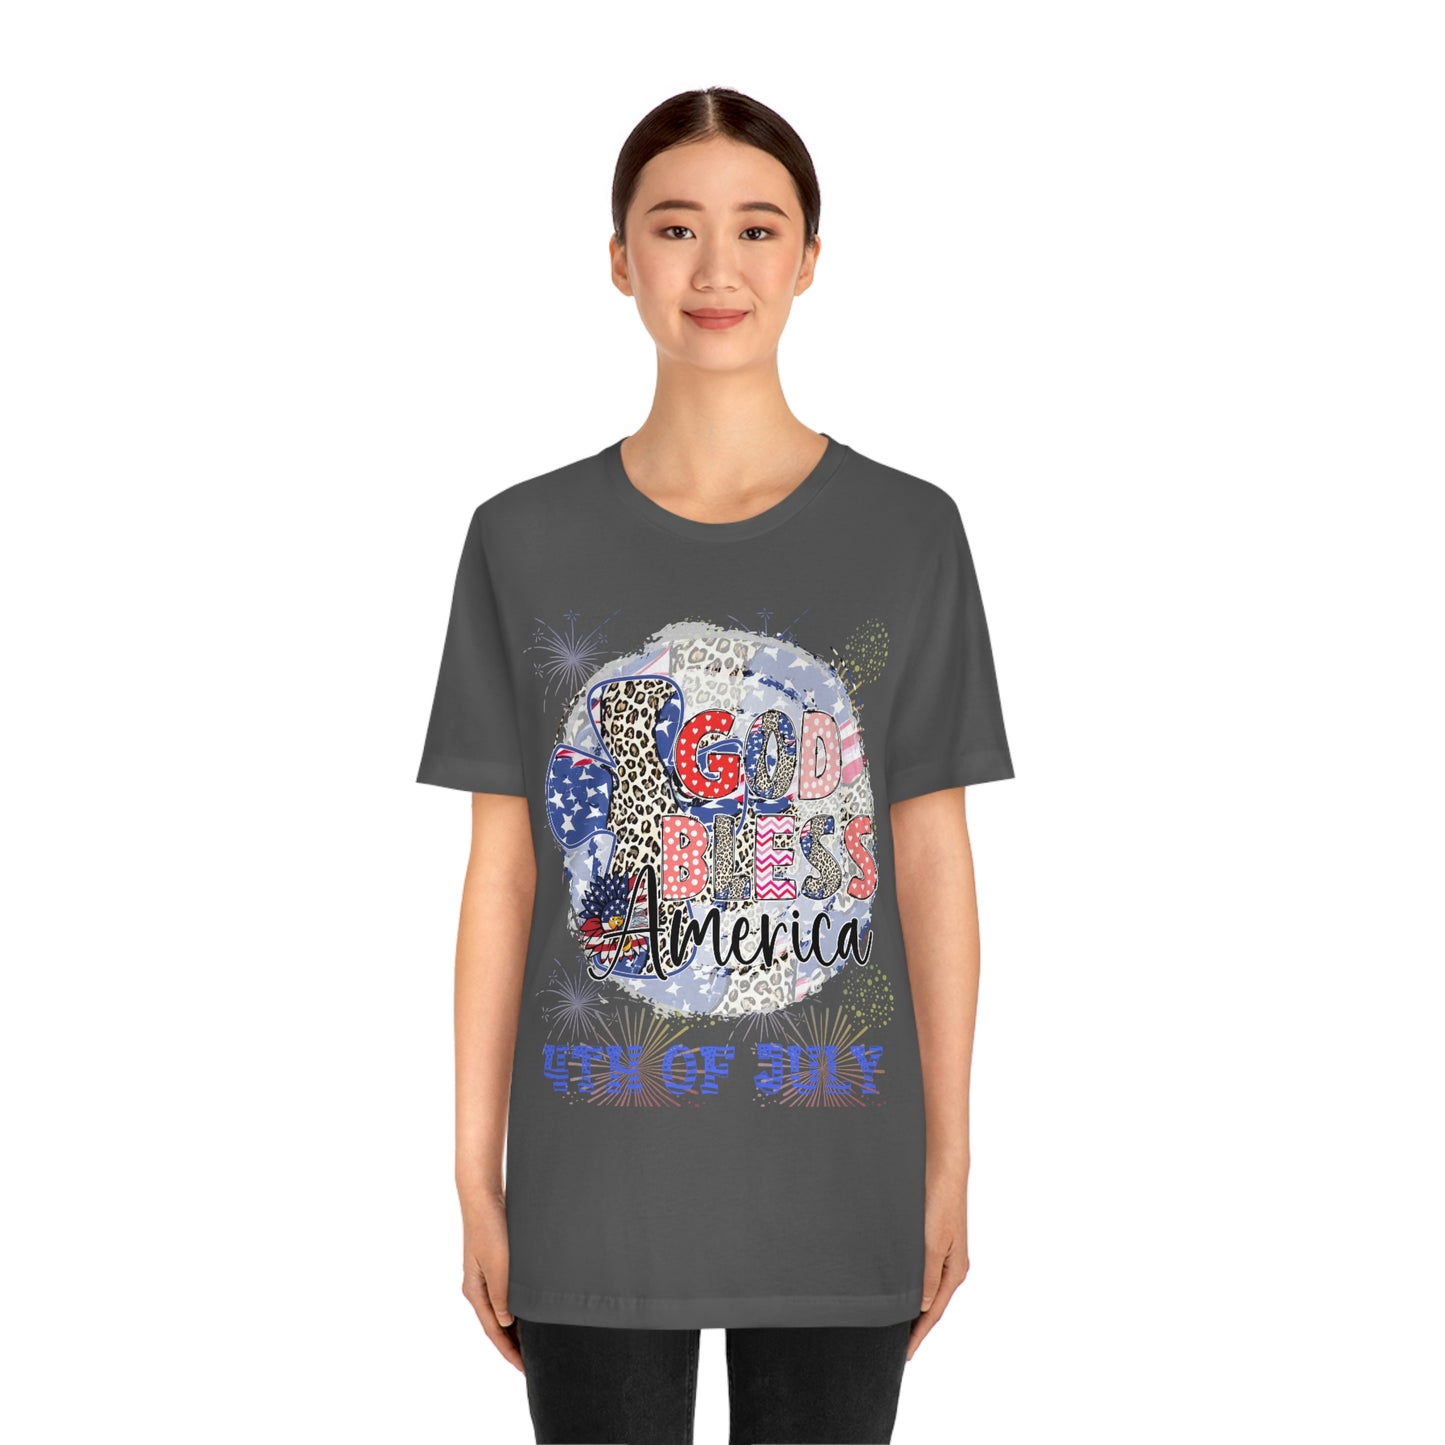 4th of July, America's Day, USA, God Bless America, Short Sleeve Tee